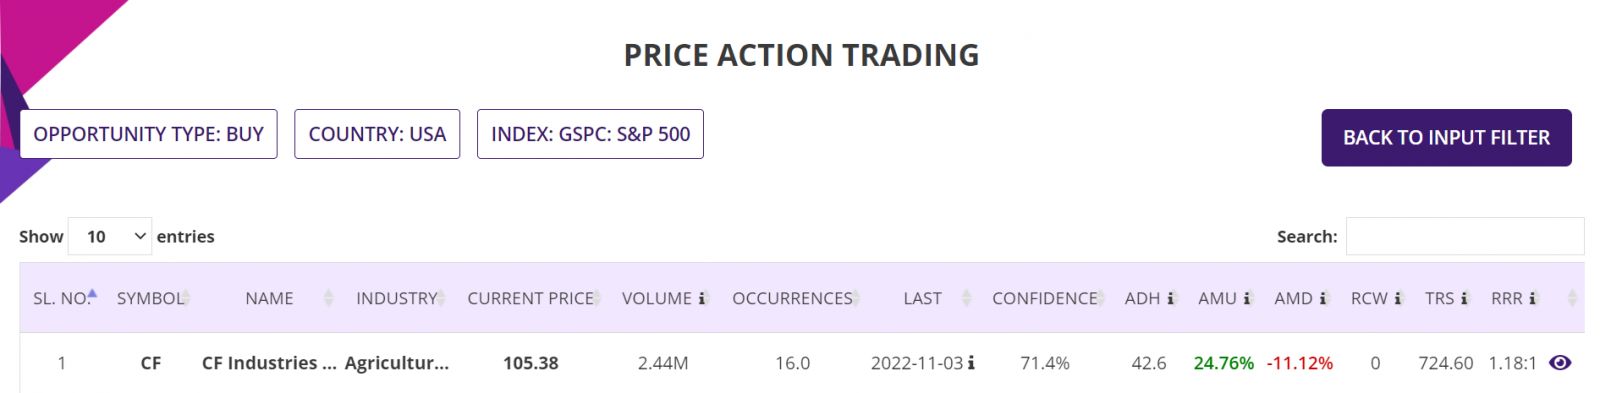 Price action trading strategy, summary report, S&P500 Stock